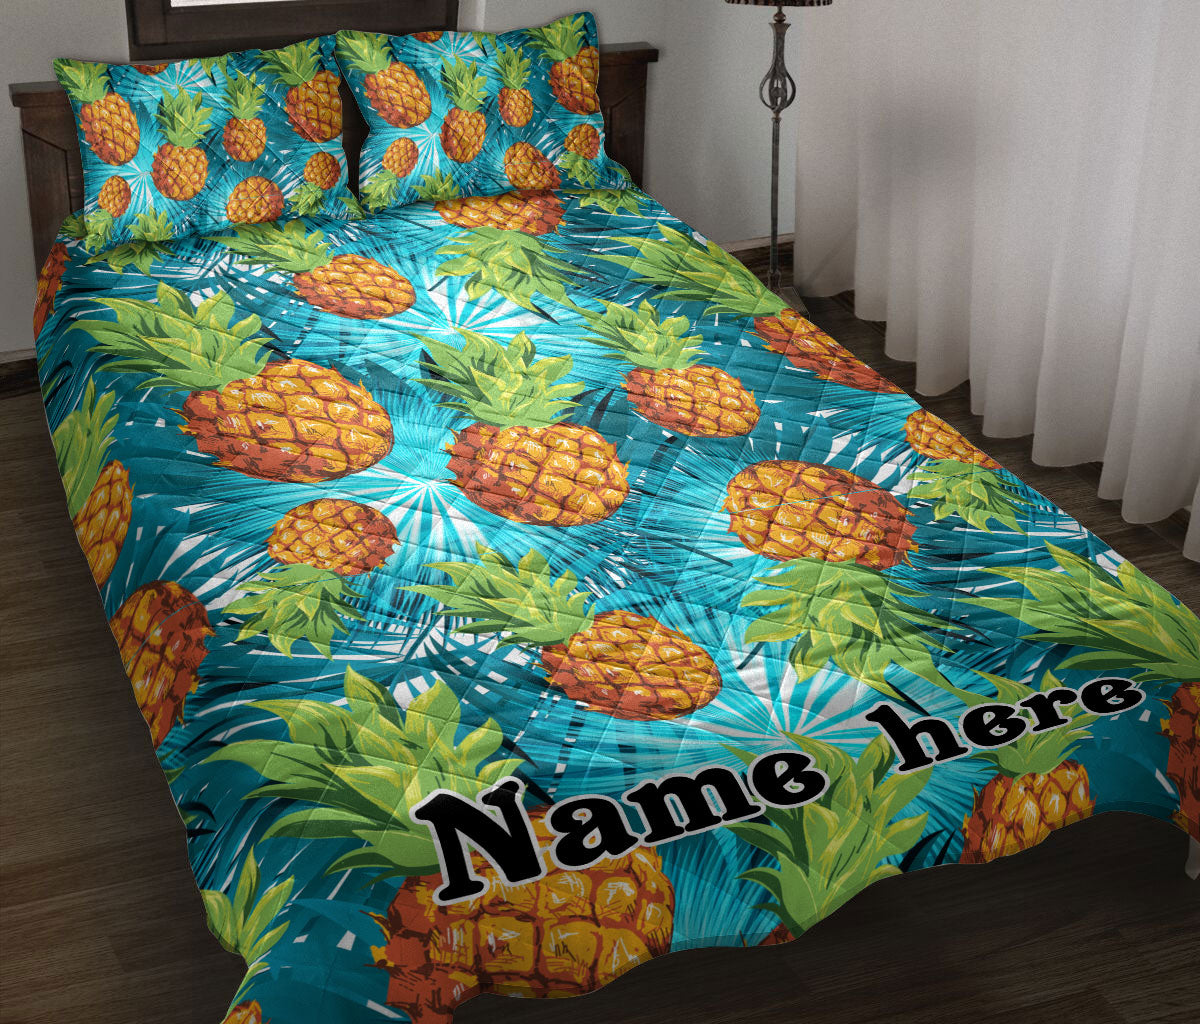 Ohaprints-Quilt-Bed-Set-Pillowcase-Cute-Pineapples-Seamless-Fashion-Tropical-Blue-Custom-Personalized-Name-Blanket-Bedspread-Bedding-2932-Throw (55'' x 60'')